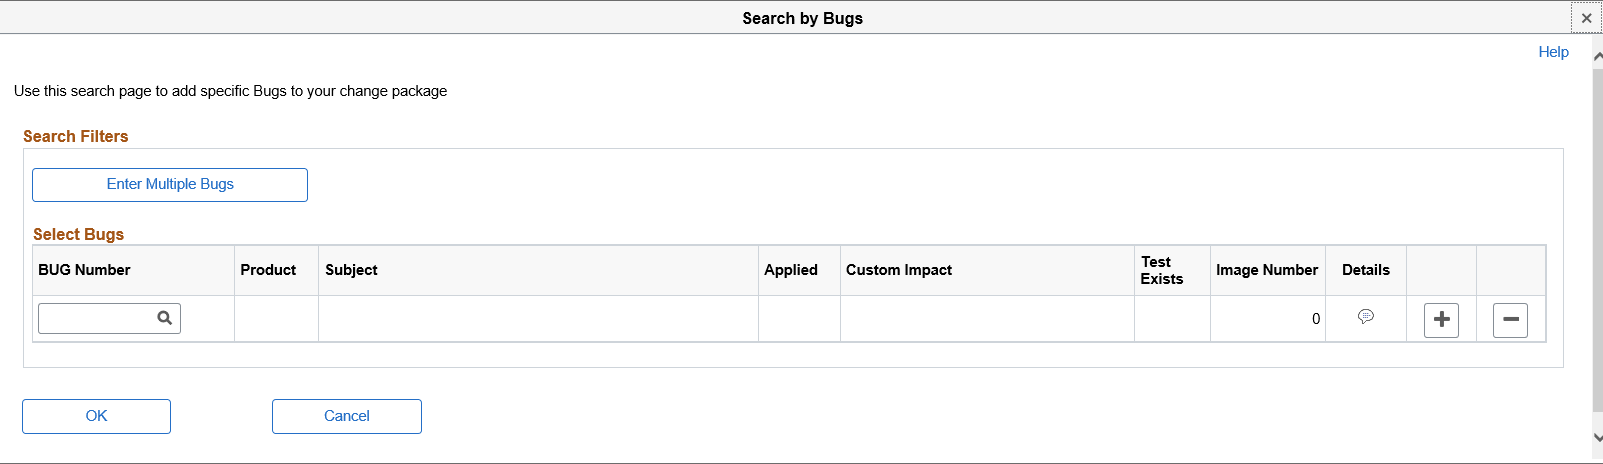 Search by Bugs page